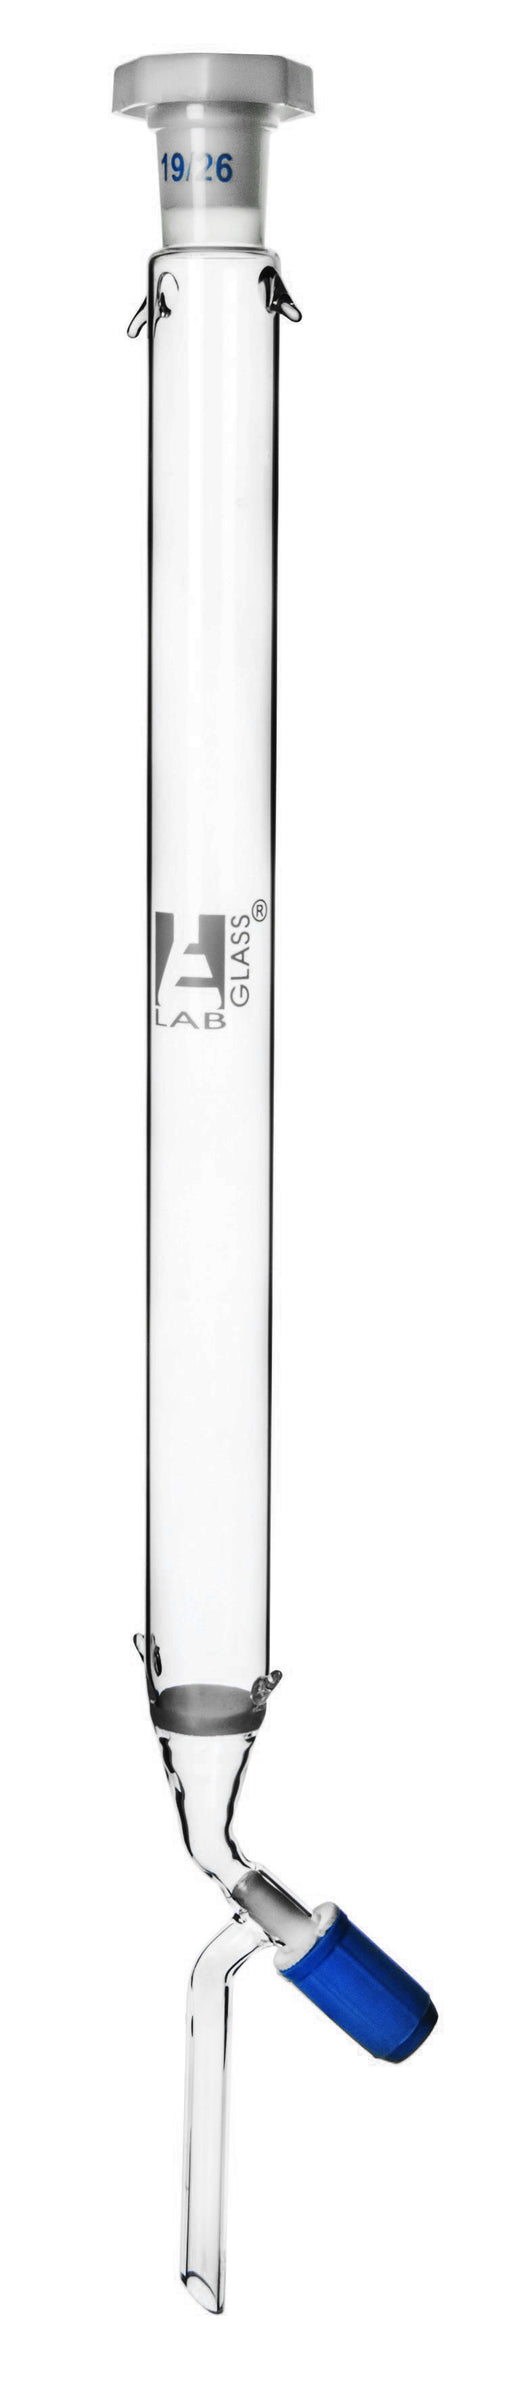 Chromatography Column, 12 Inch - 19/26 Joint Size - Borosilicate 3.3 Glass - With Rotaflow Stopcock & Sintered Disc - Eisco Labs